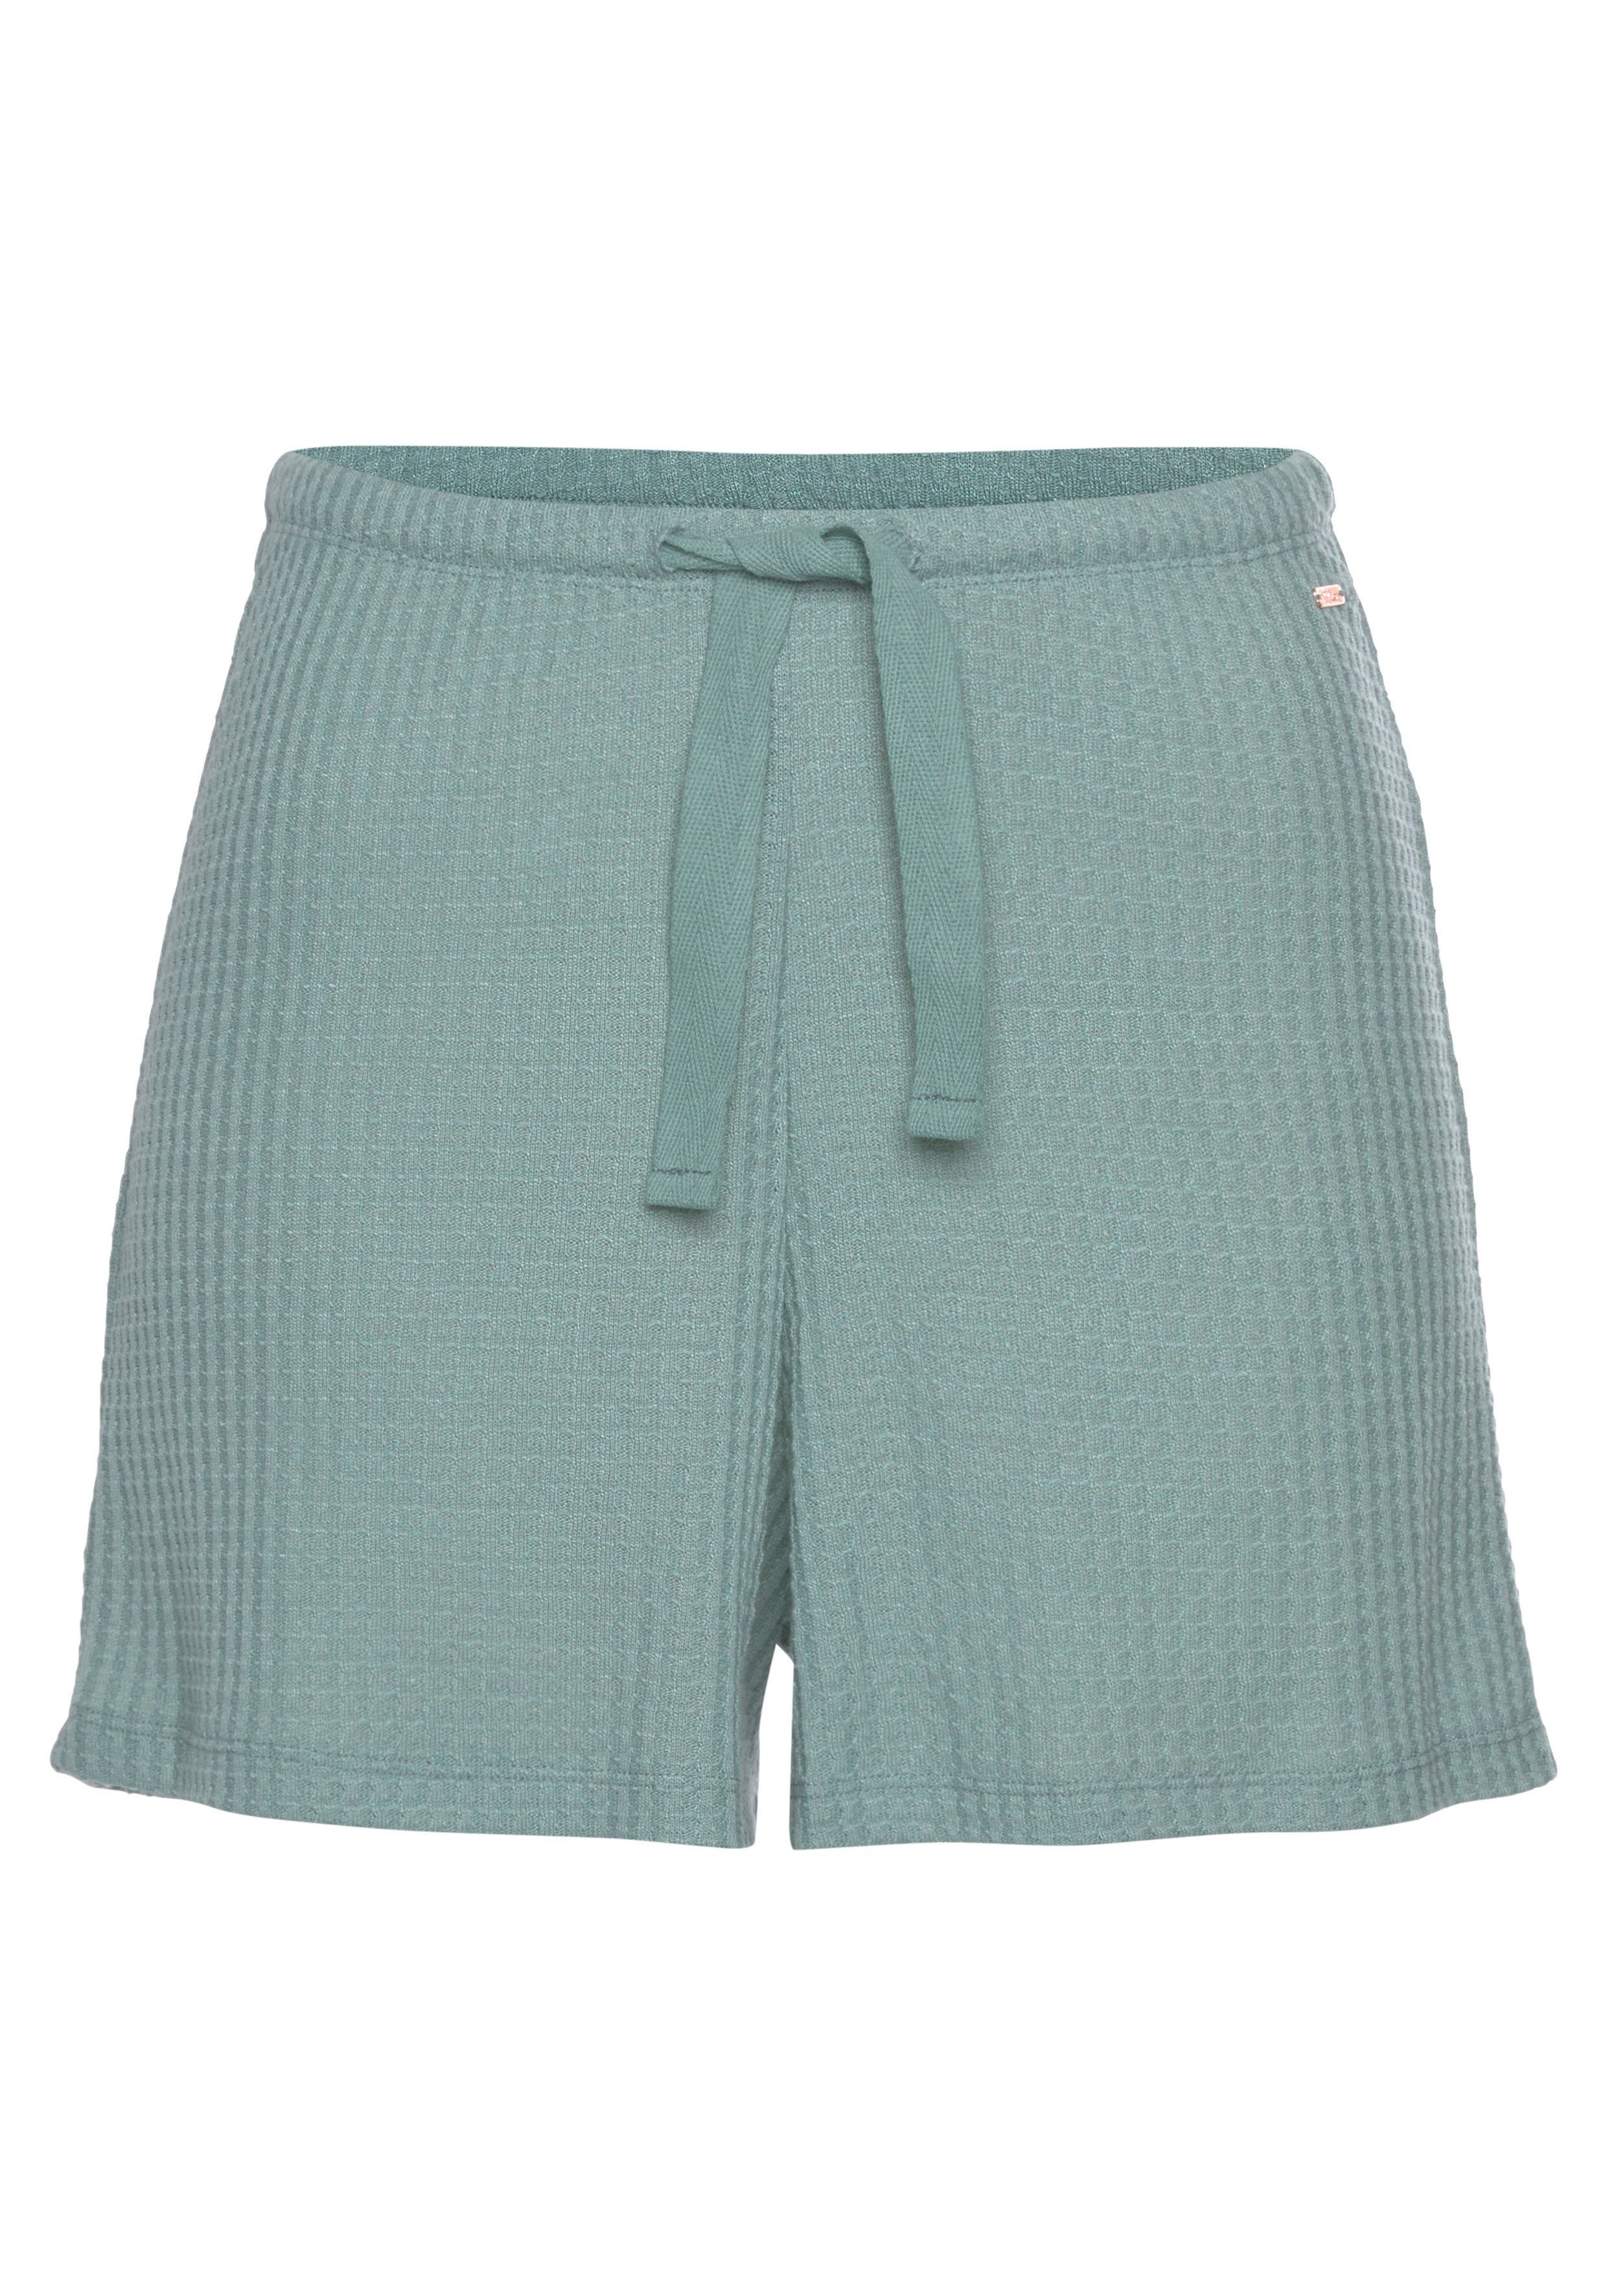 Loungeanzug mint s.Oliver Relaxshorts